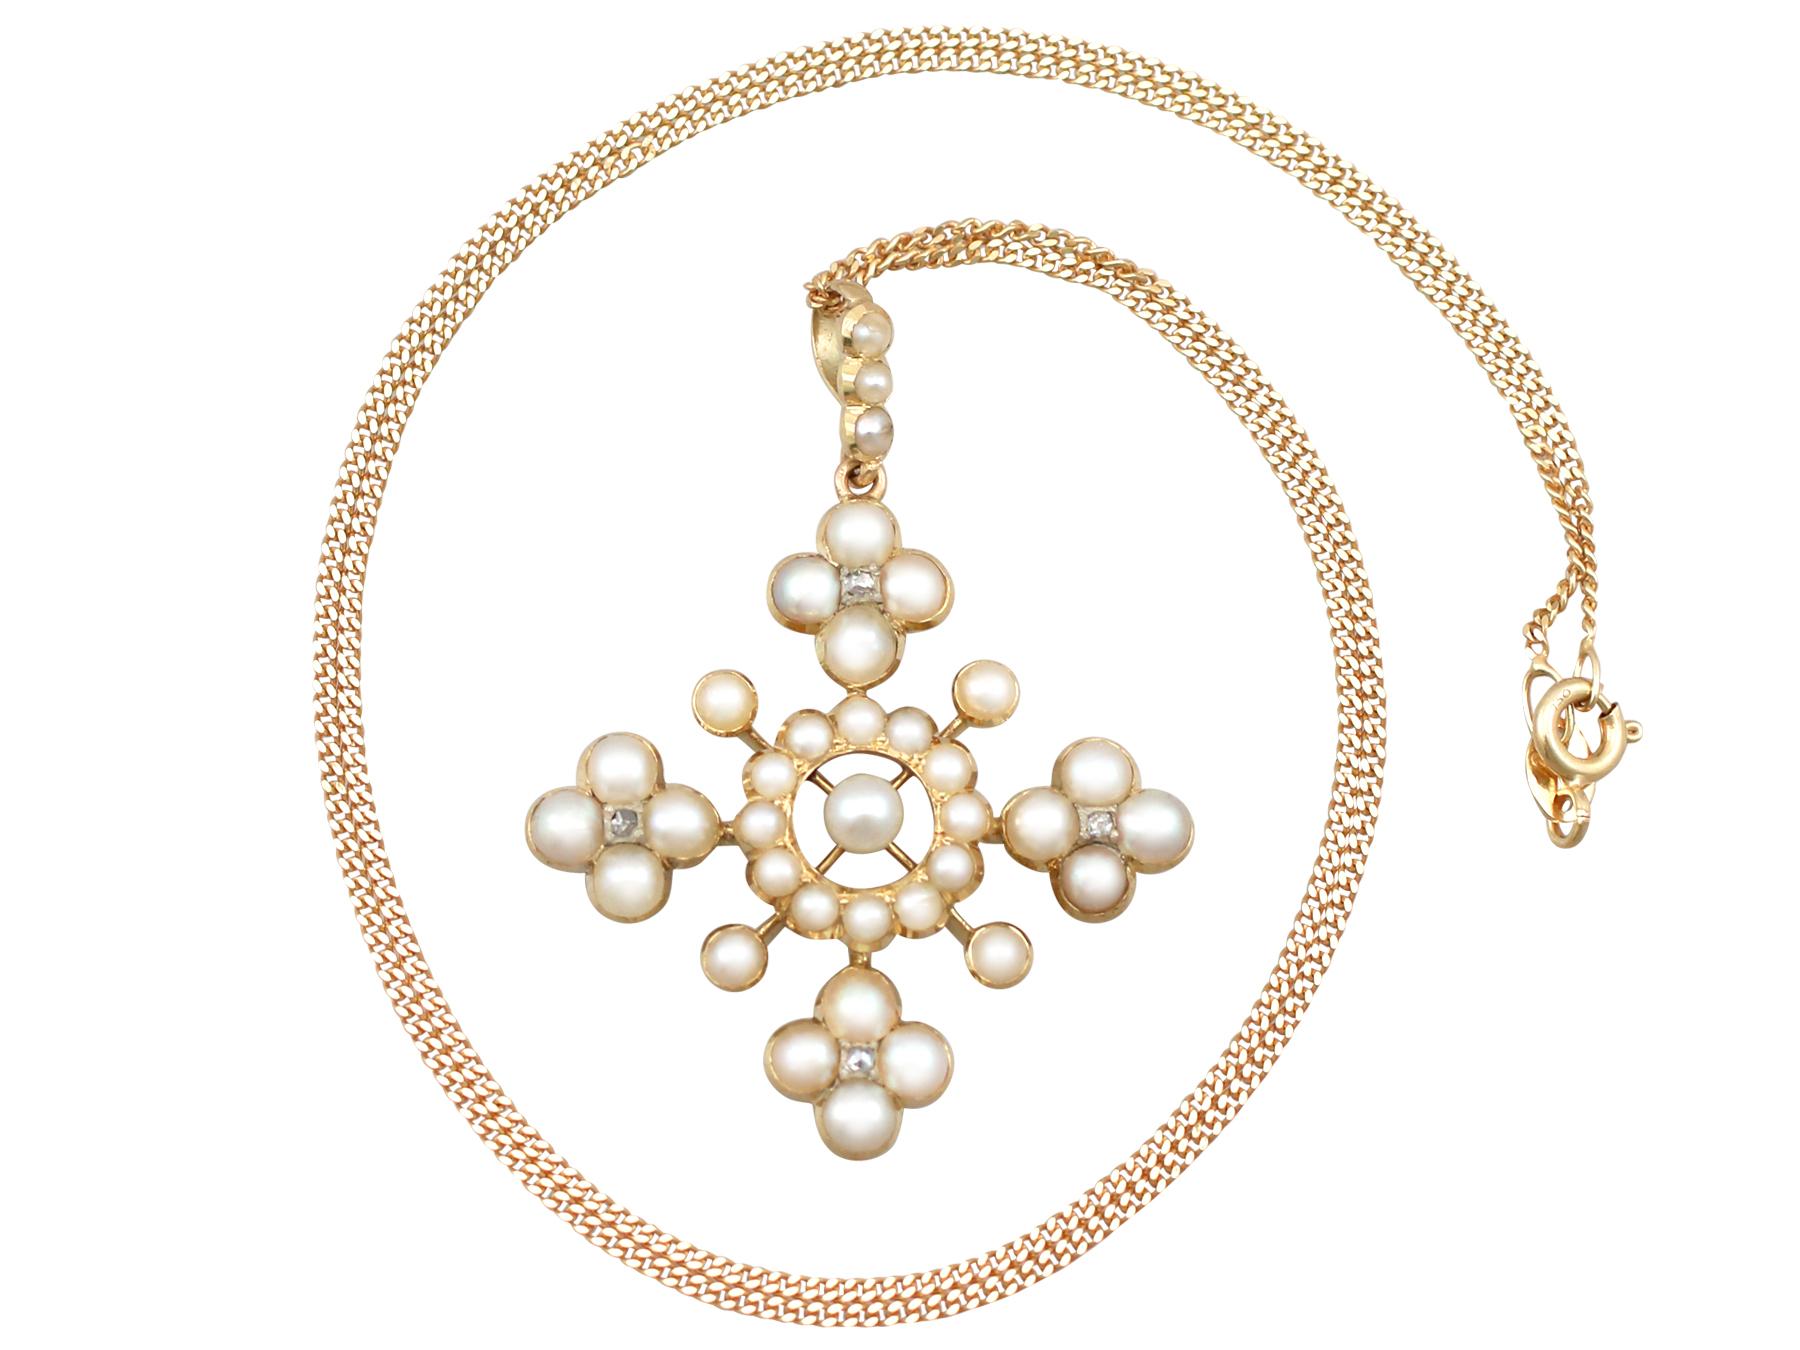 A stunning Victorian seed pearl and 0.06 carat diamond, 15 karat yellow gold 'cross' pendant; part of our diverse antique jewellery and estate jewelry collections.

This fine and impressive Victorian pearl cross pendant has been crafted in 15k